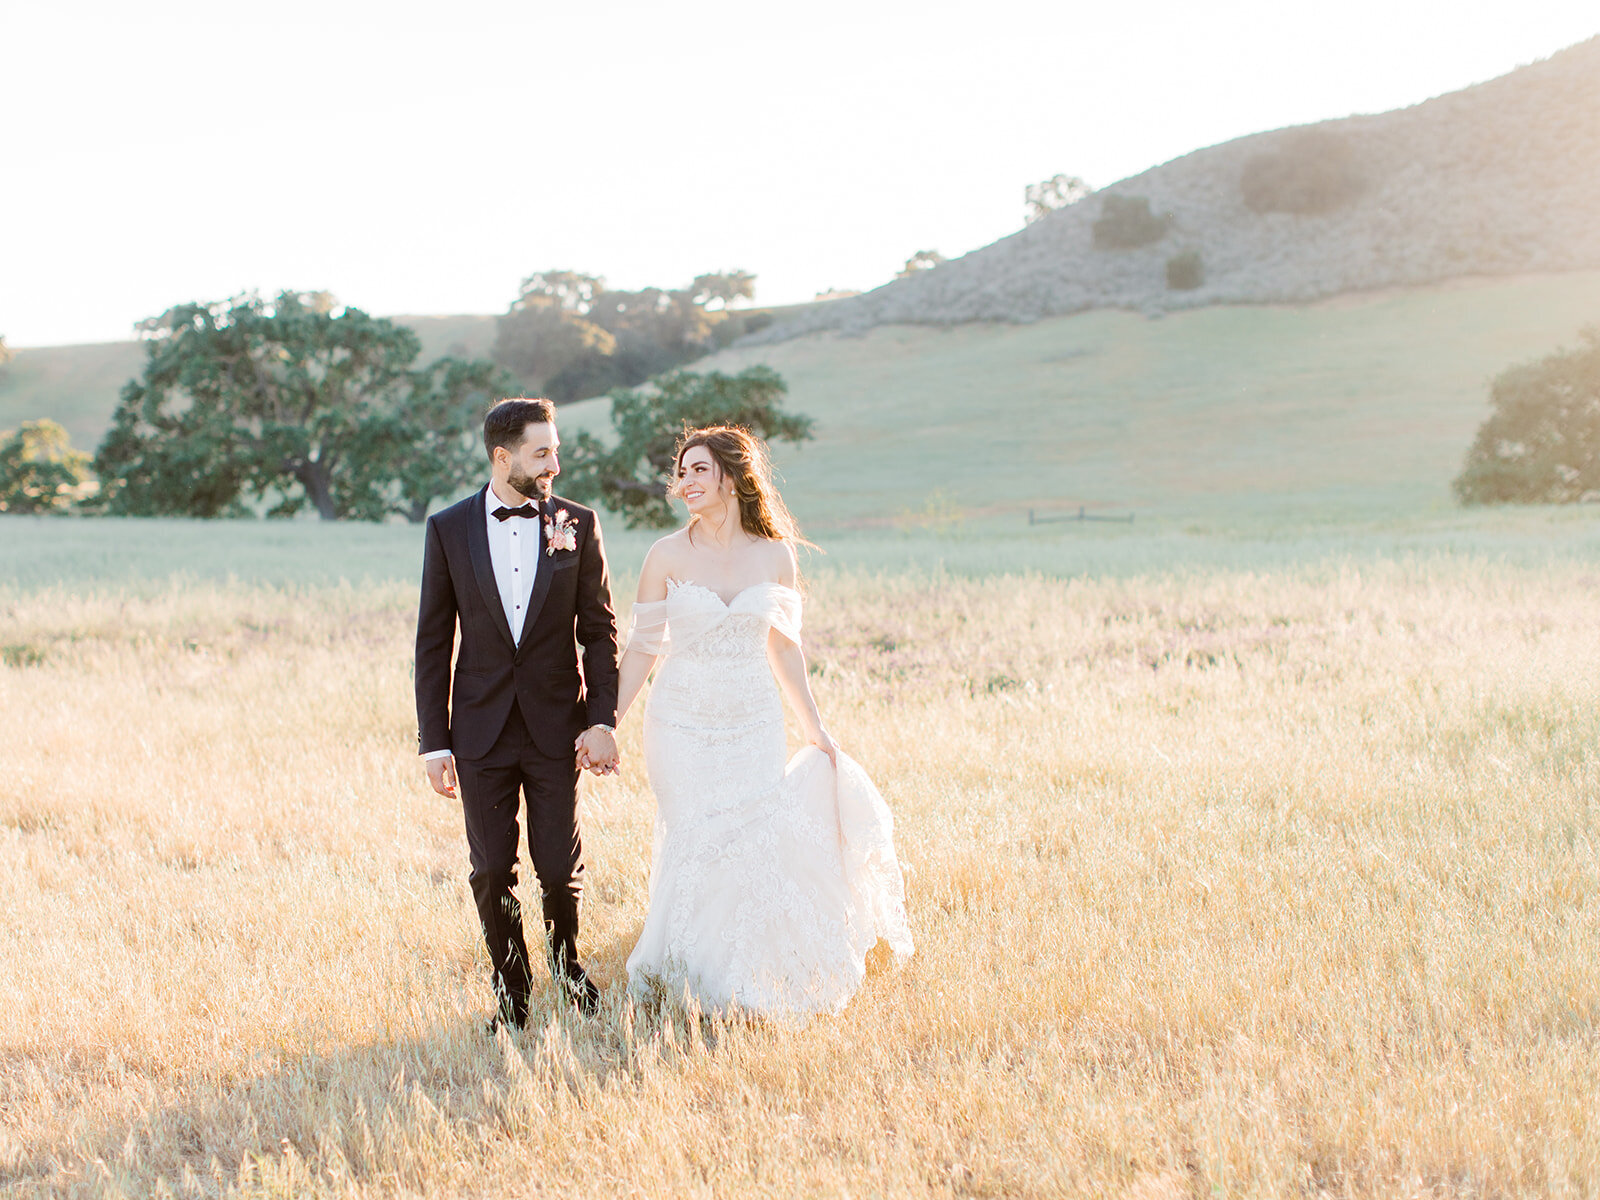 bride and groom holding hands and walking through a field at sunset